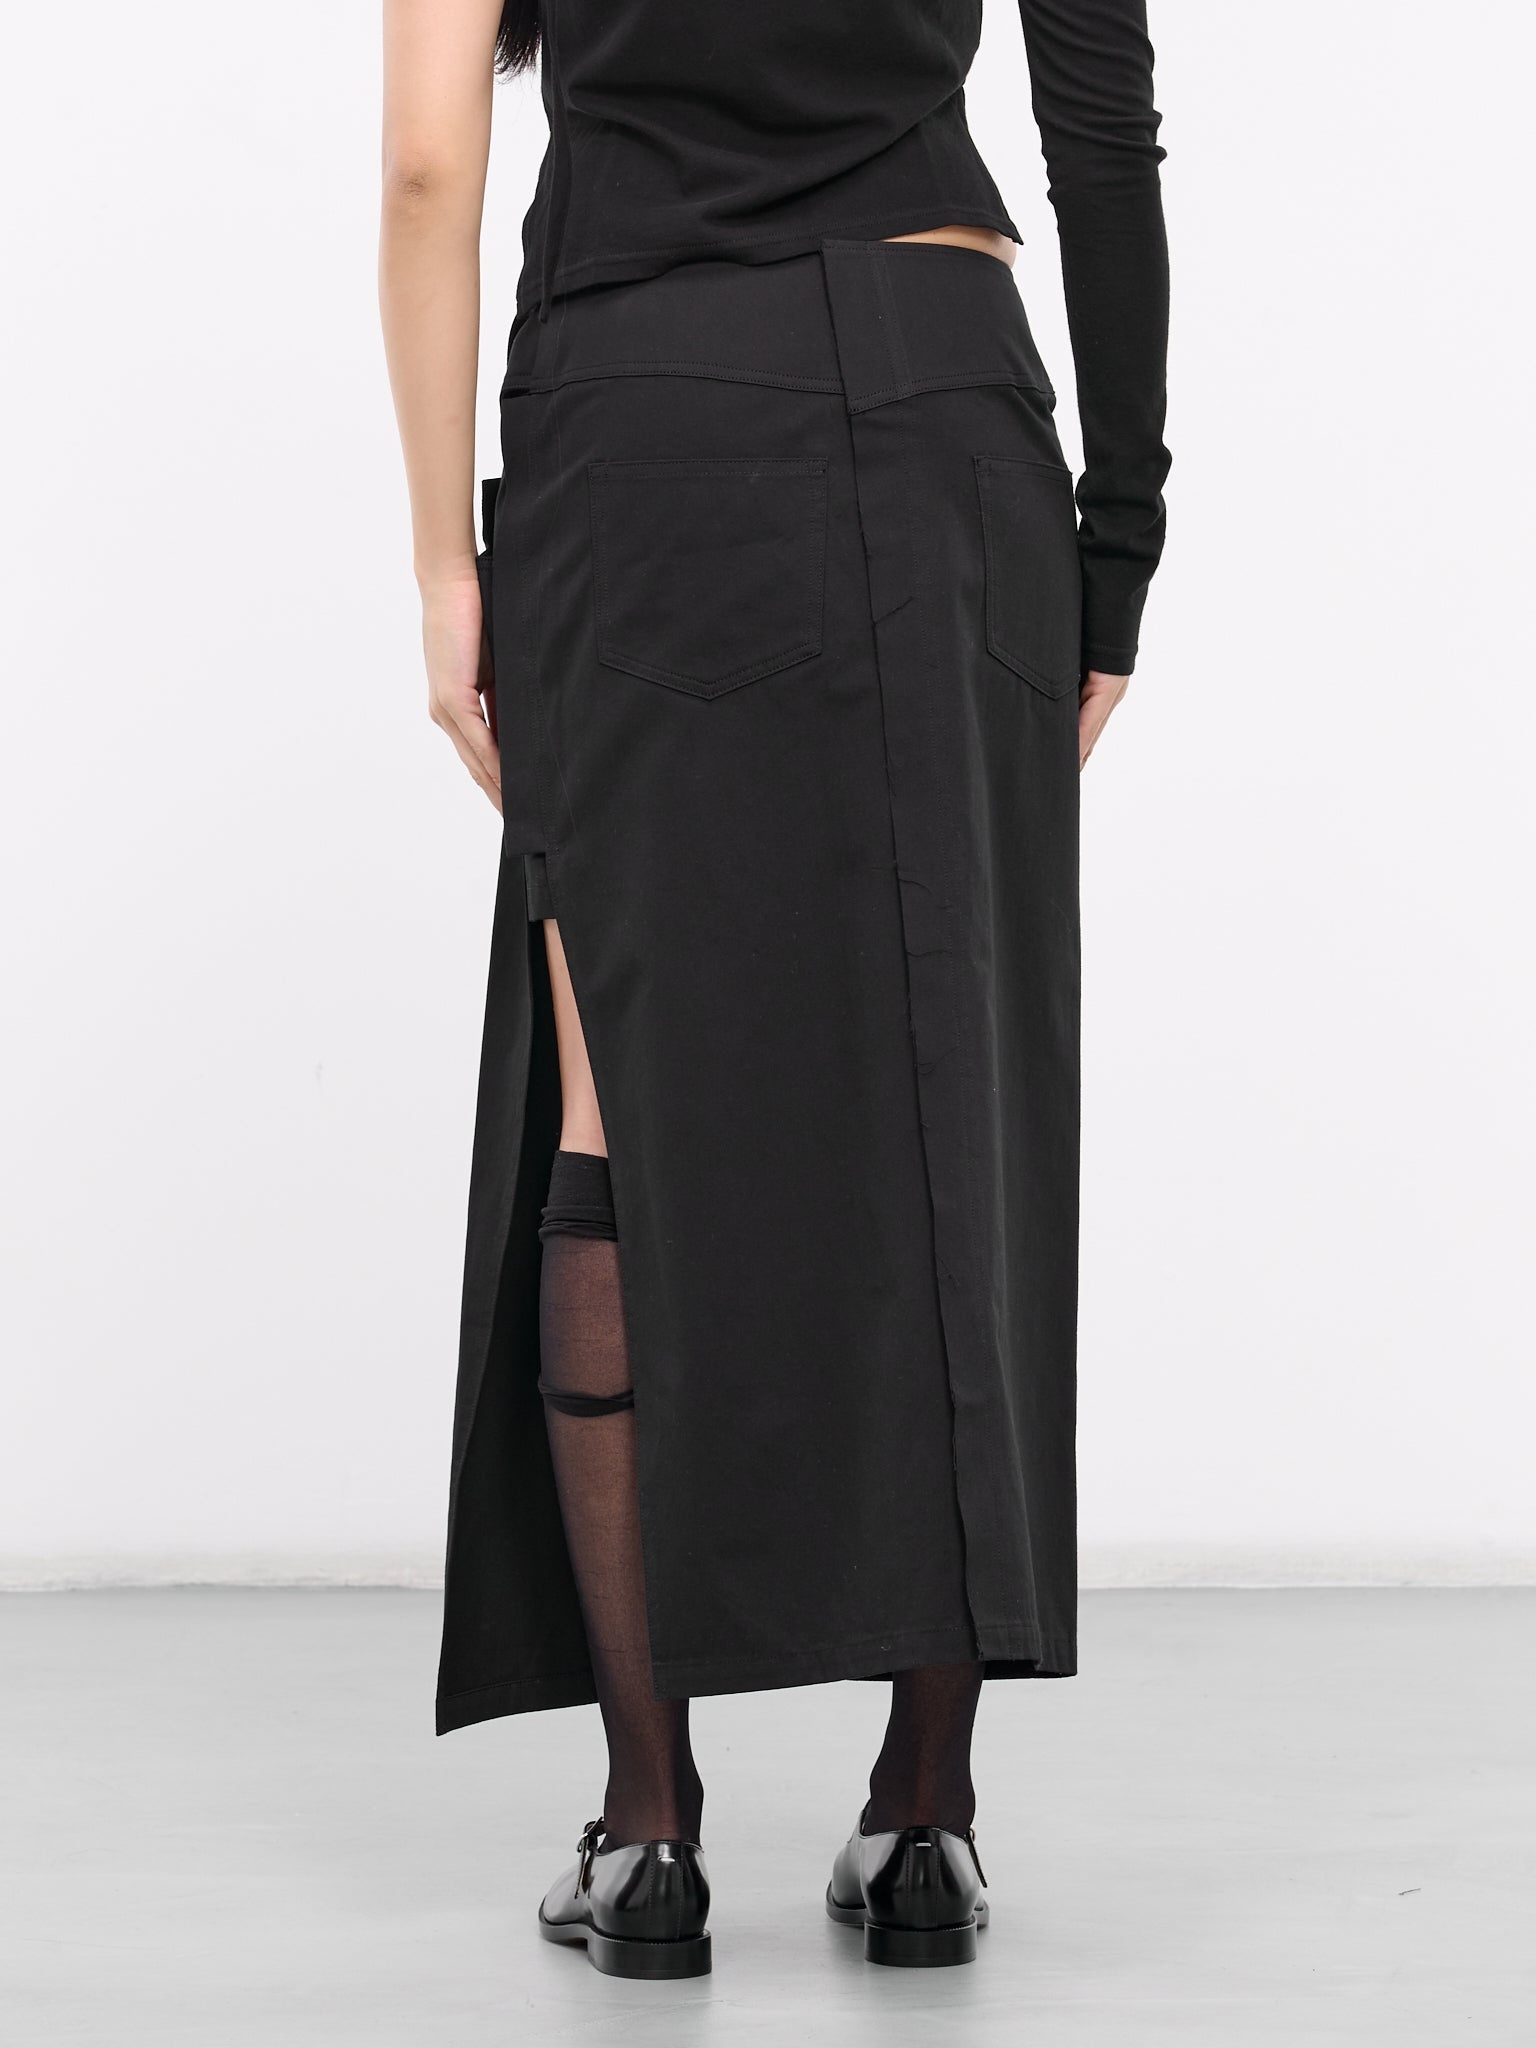 Lace-Up Maxi Skirt - 3